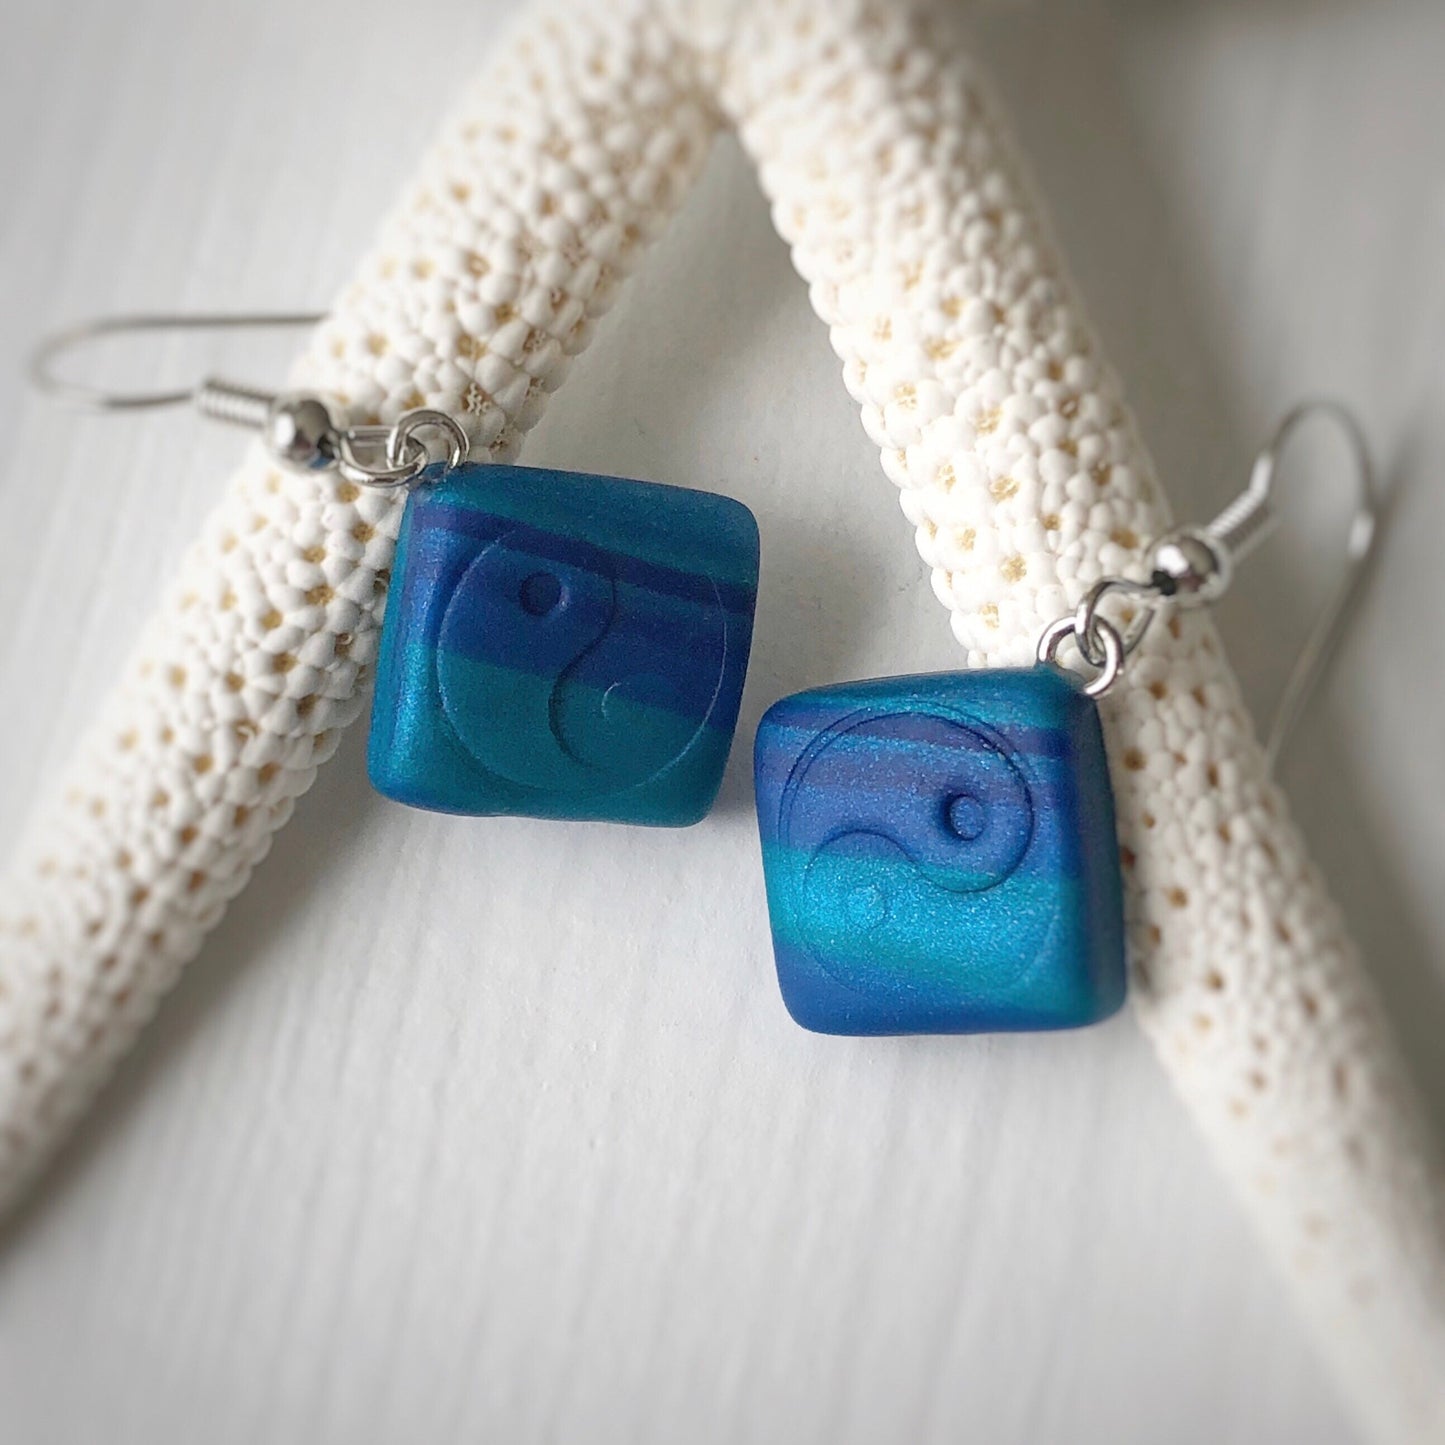 Diamond abstract blue and teal earrings with yin yang design, IWC Earrings